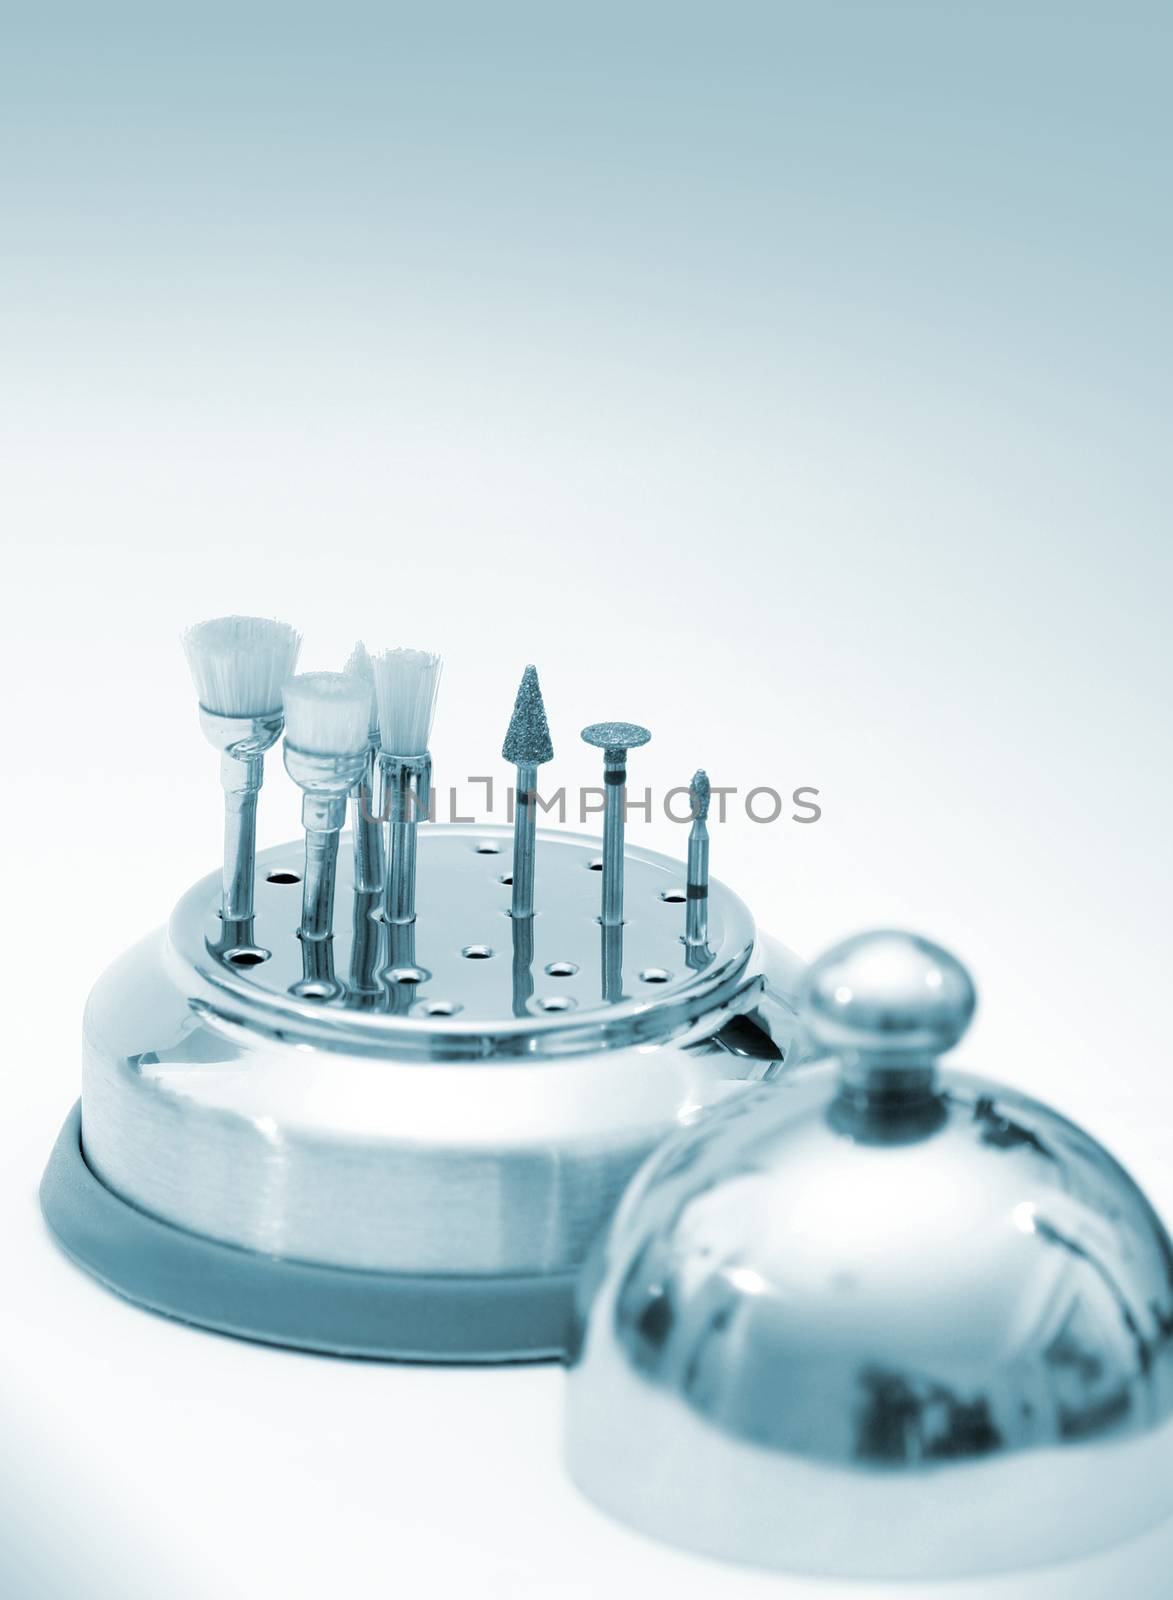 Set of chrome dental drills, viewed from the side with shallow depth of field